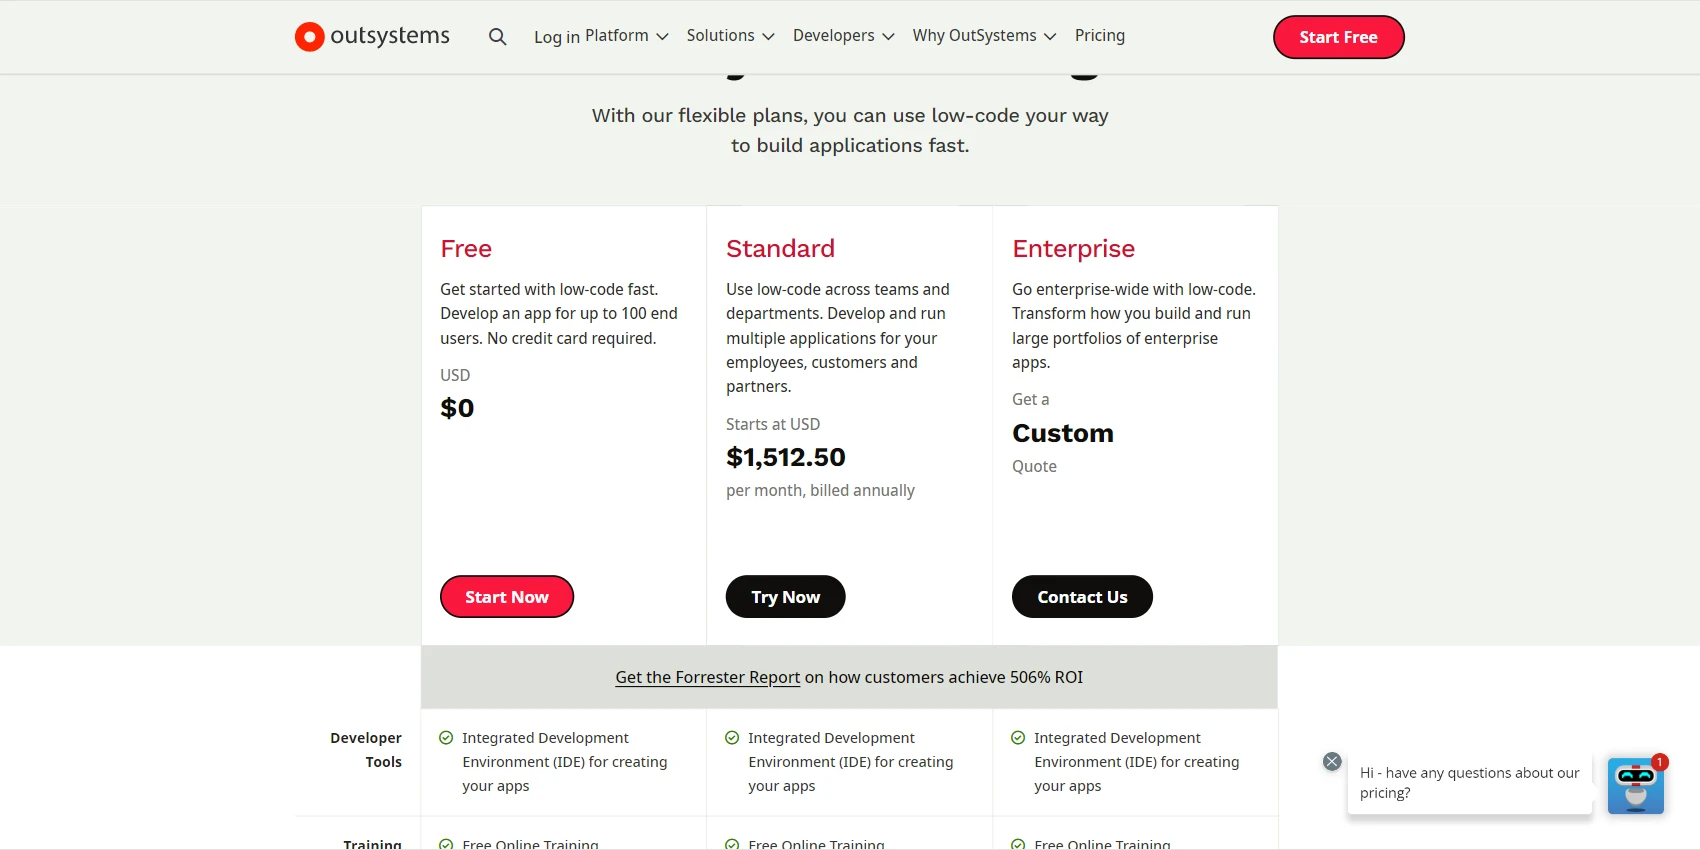 5. OutSystems Pricing